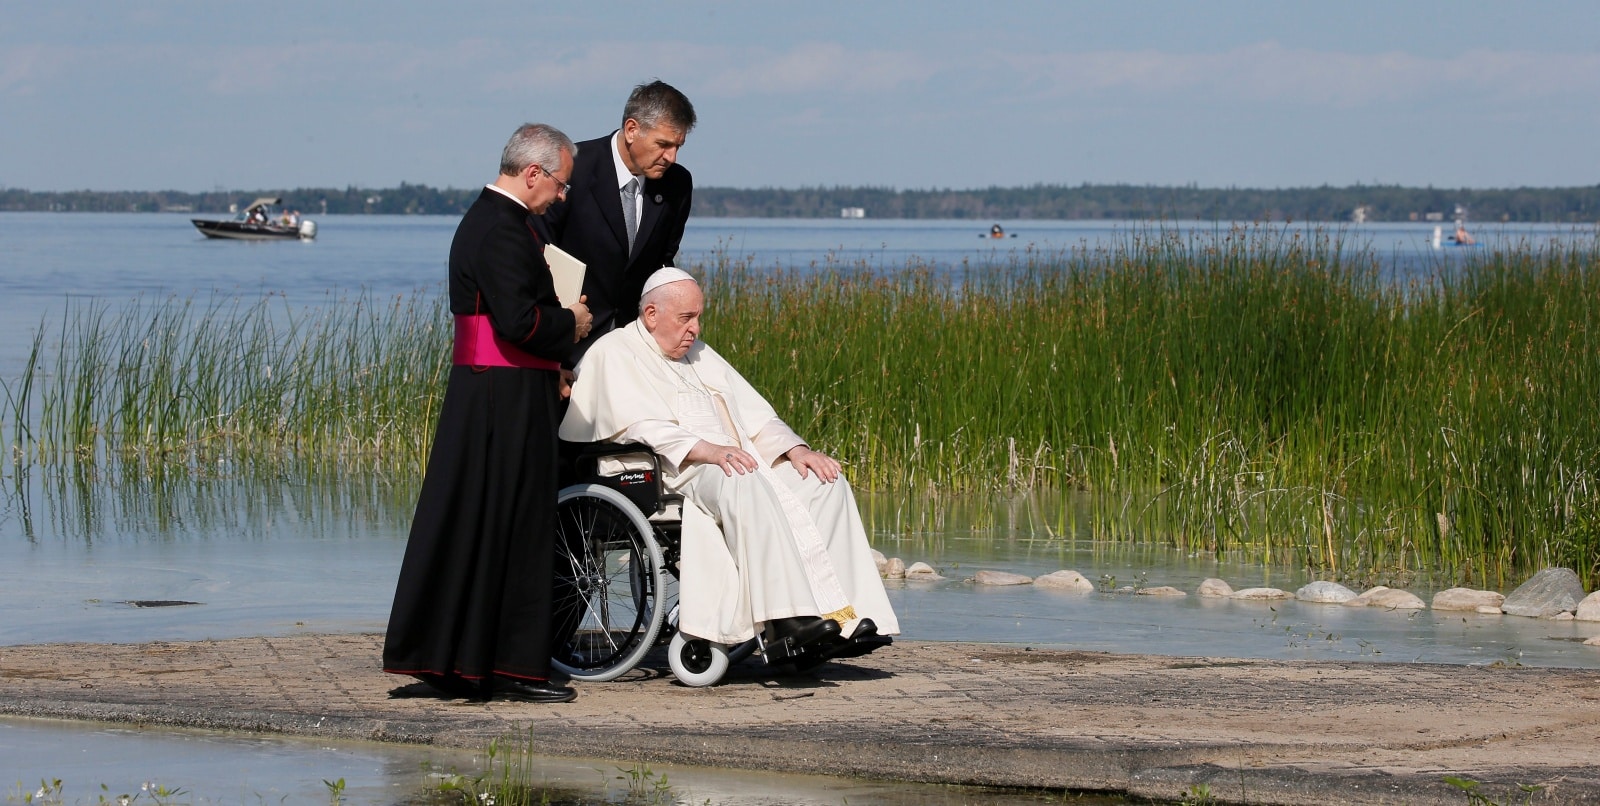 Pope Francis visits Canada